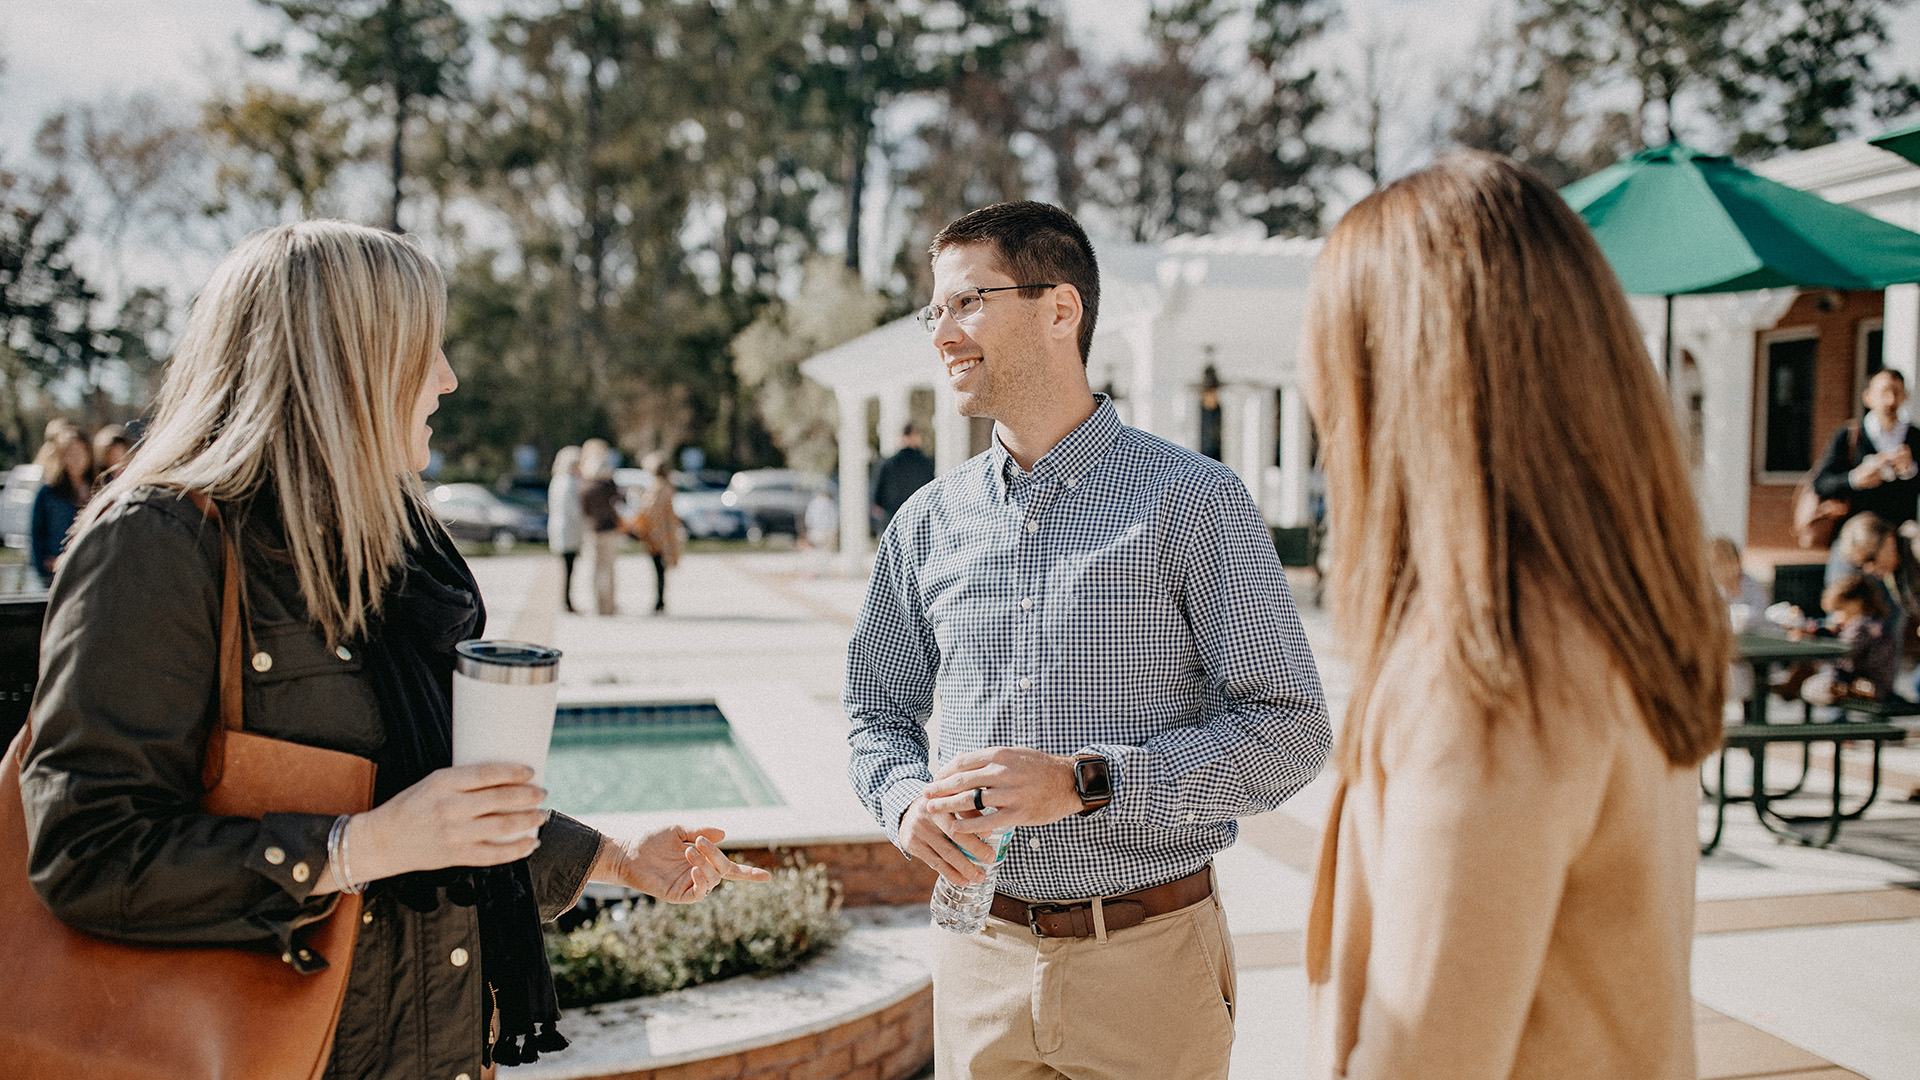 Welcome! Here's What to Expect
Our ultimate goal is to help you get closer to Jesus and dive deeper into His Word. We strive to make MPC a friendly and welcoming place for you to connect with others and grow in your faith.
